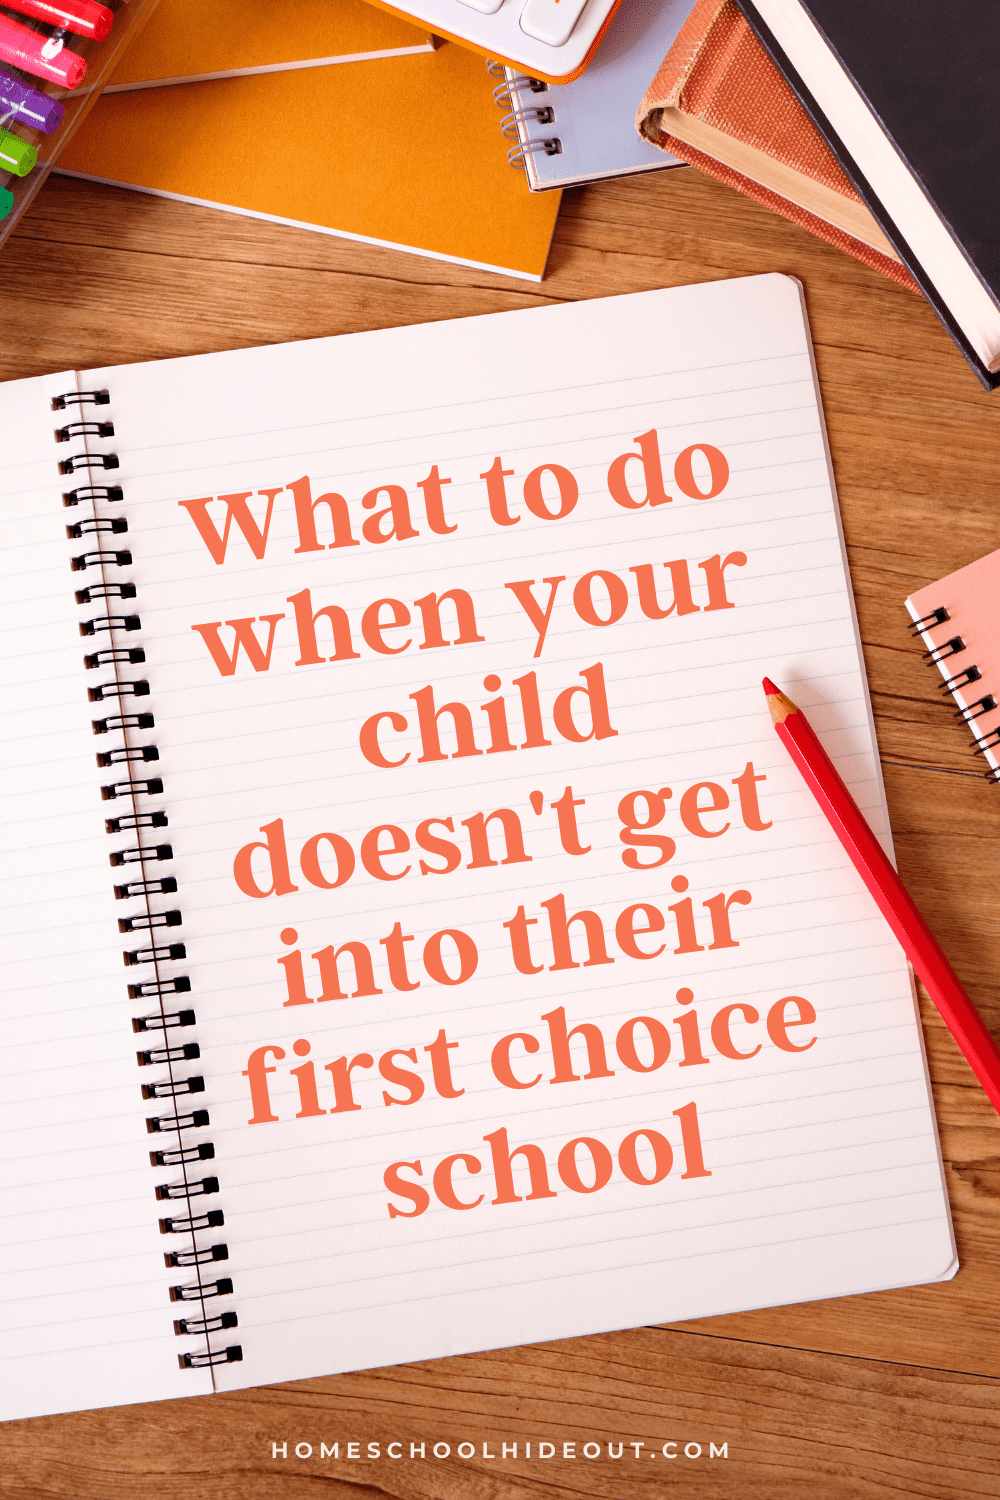 These tips for when you kid doesn't get into their first choice school are awesome! I never thought of some of these!